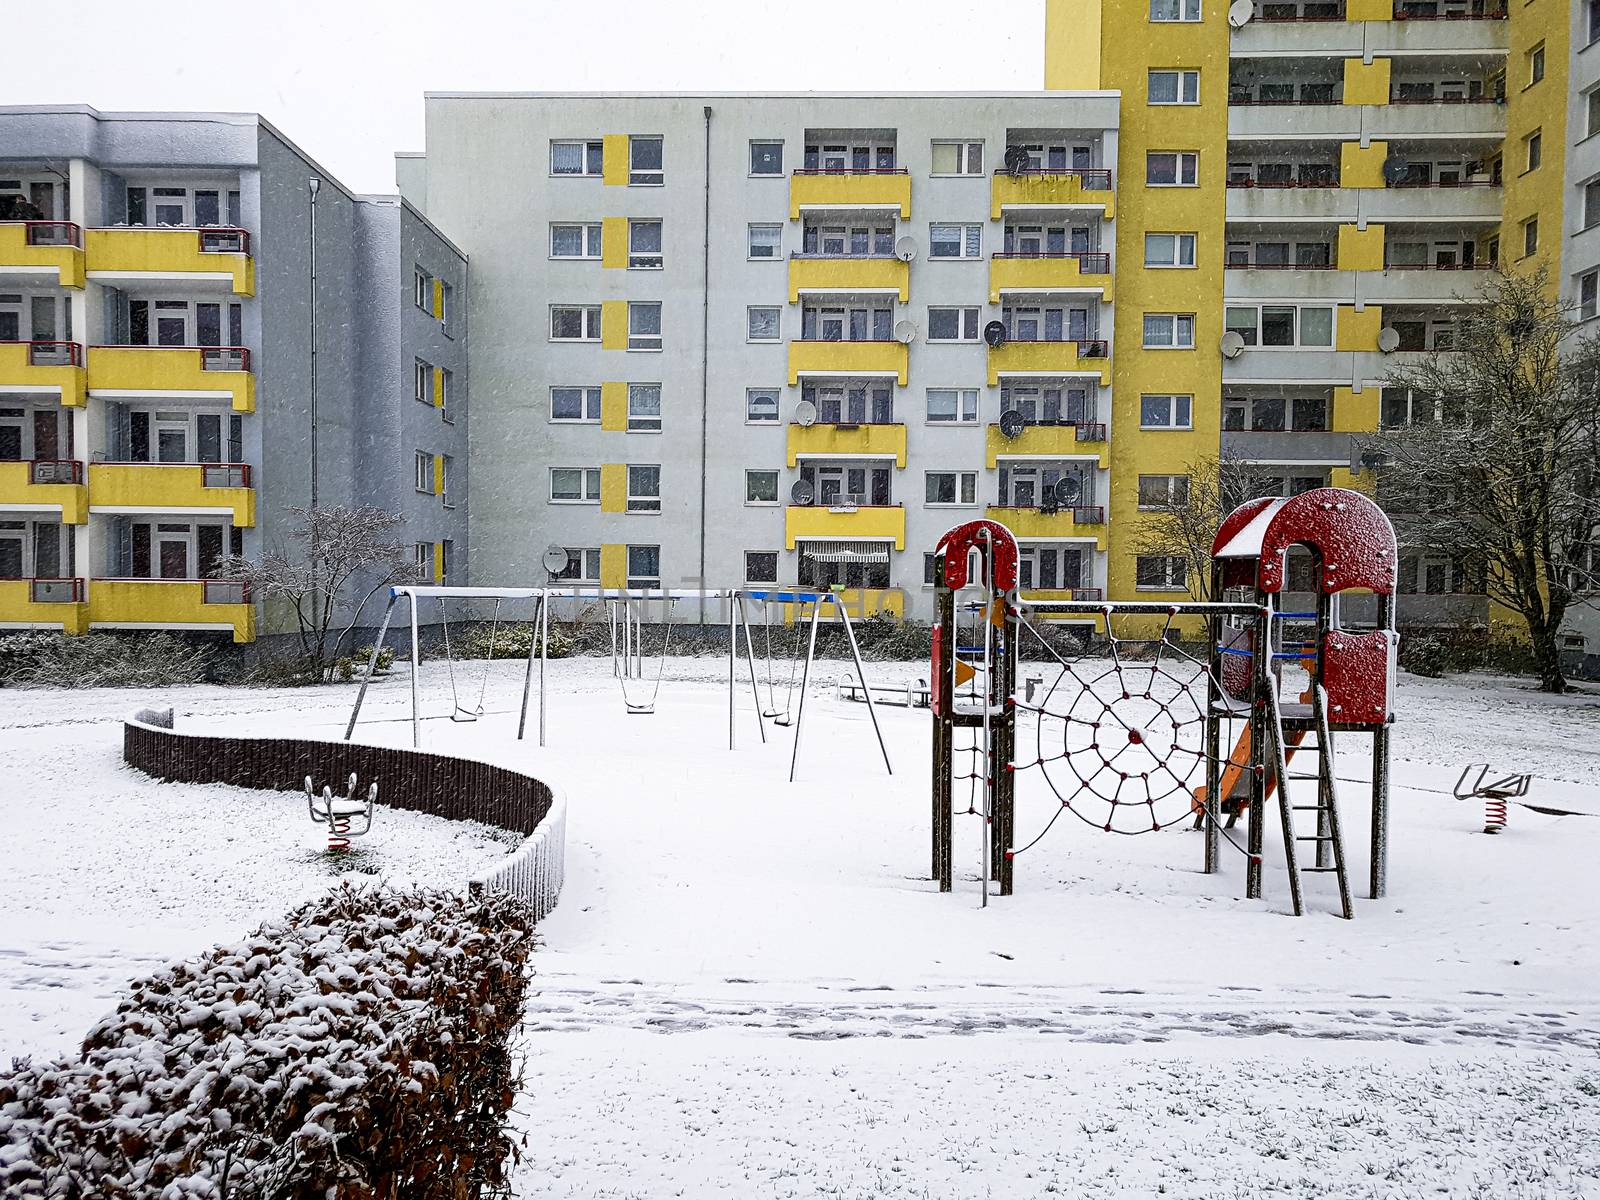 Playground with white snow in winter time in Leherheide, Bremerhaven in Germany.